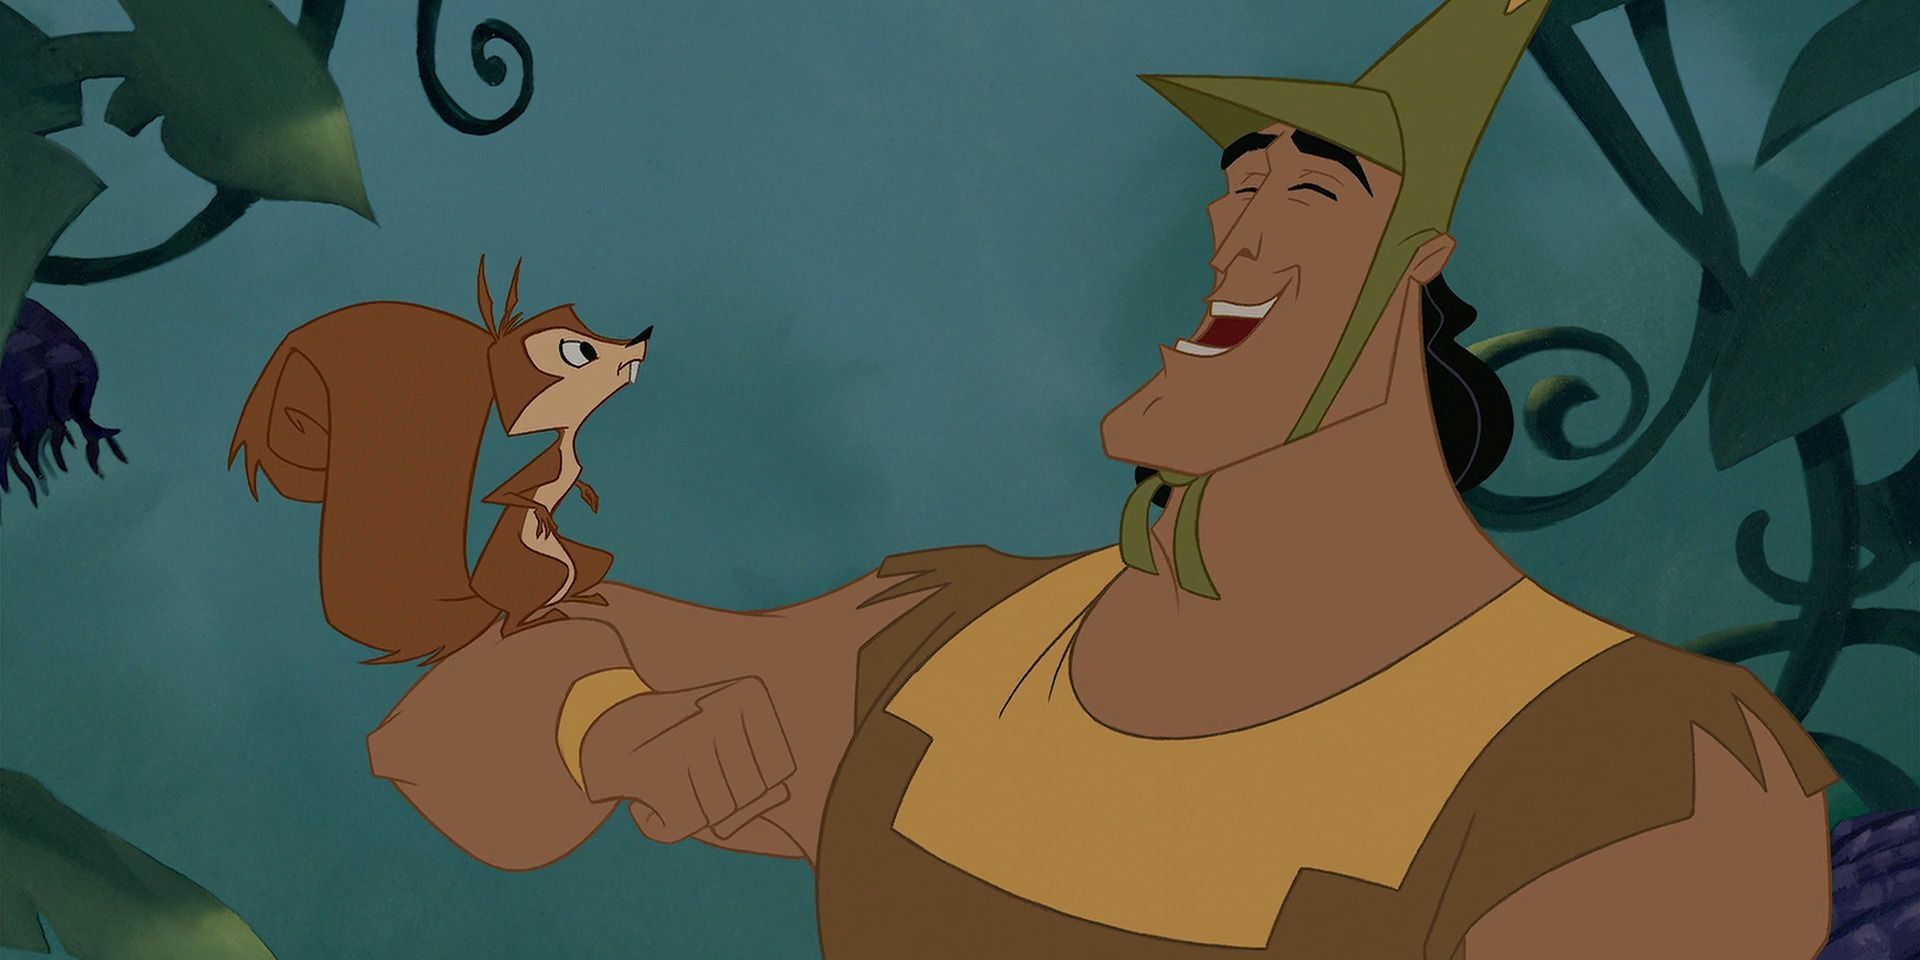 Kronk talking to a squirrel in The Emperor's New Groove.